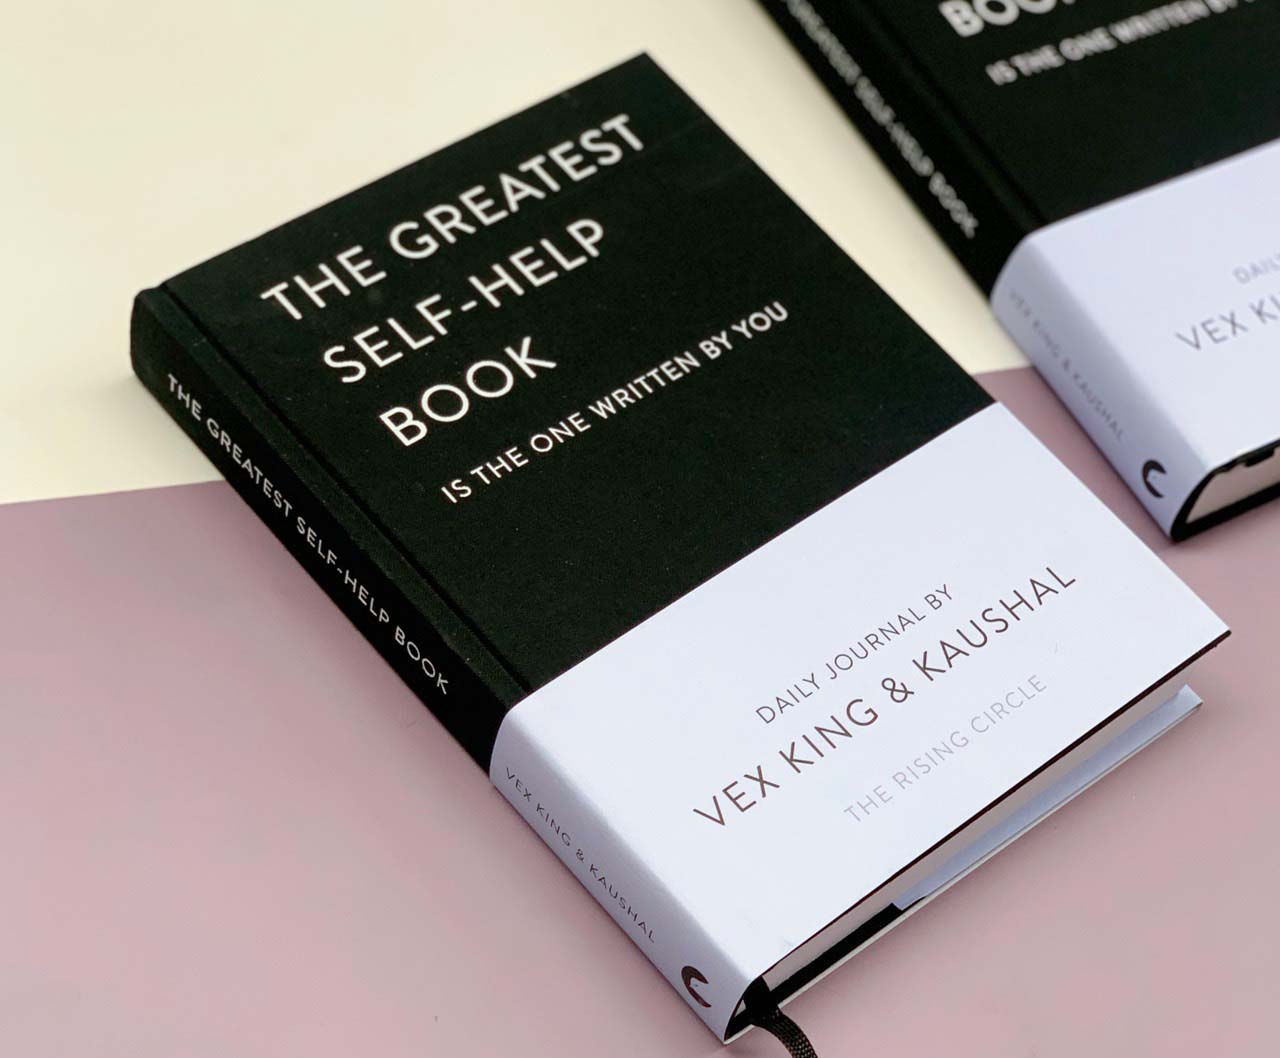  The Greatest Self-Help Book (is the one written by you